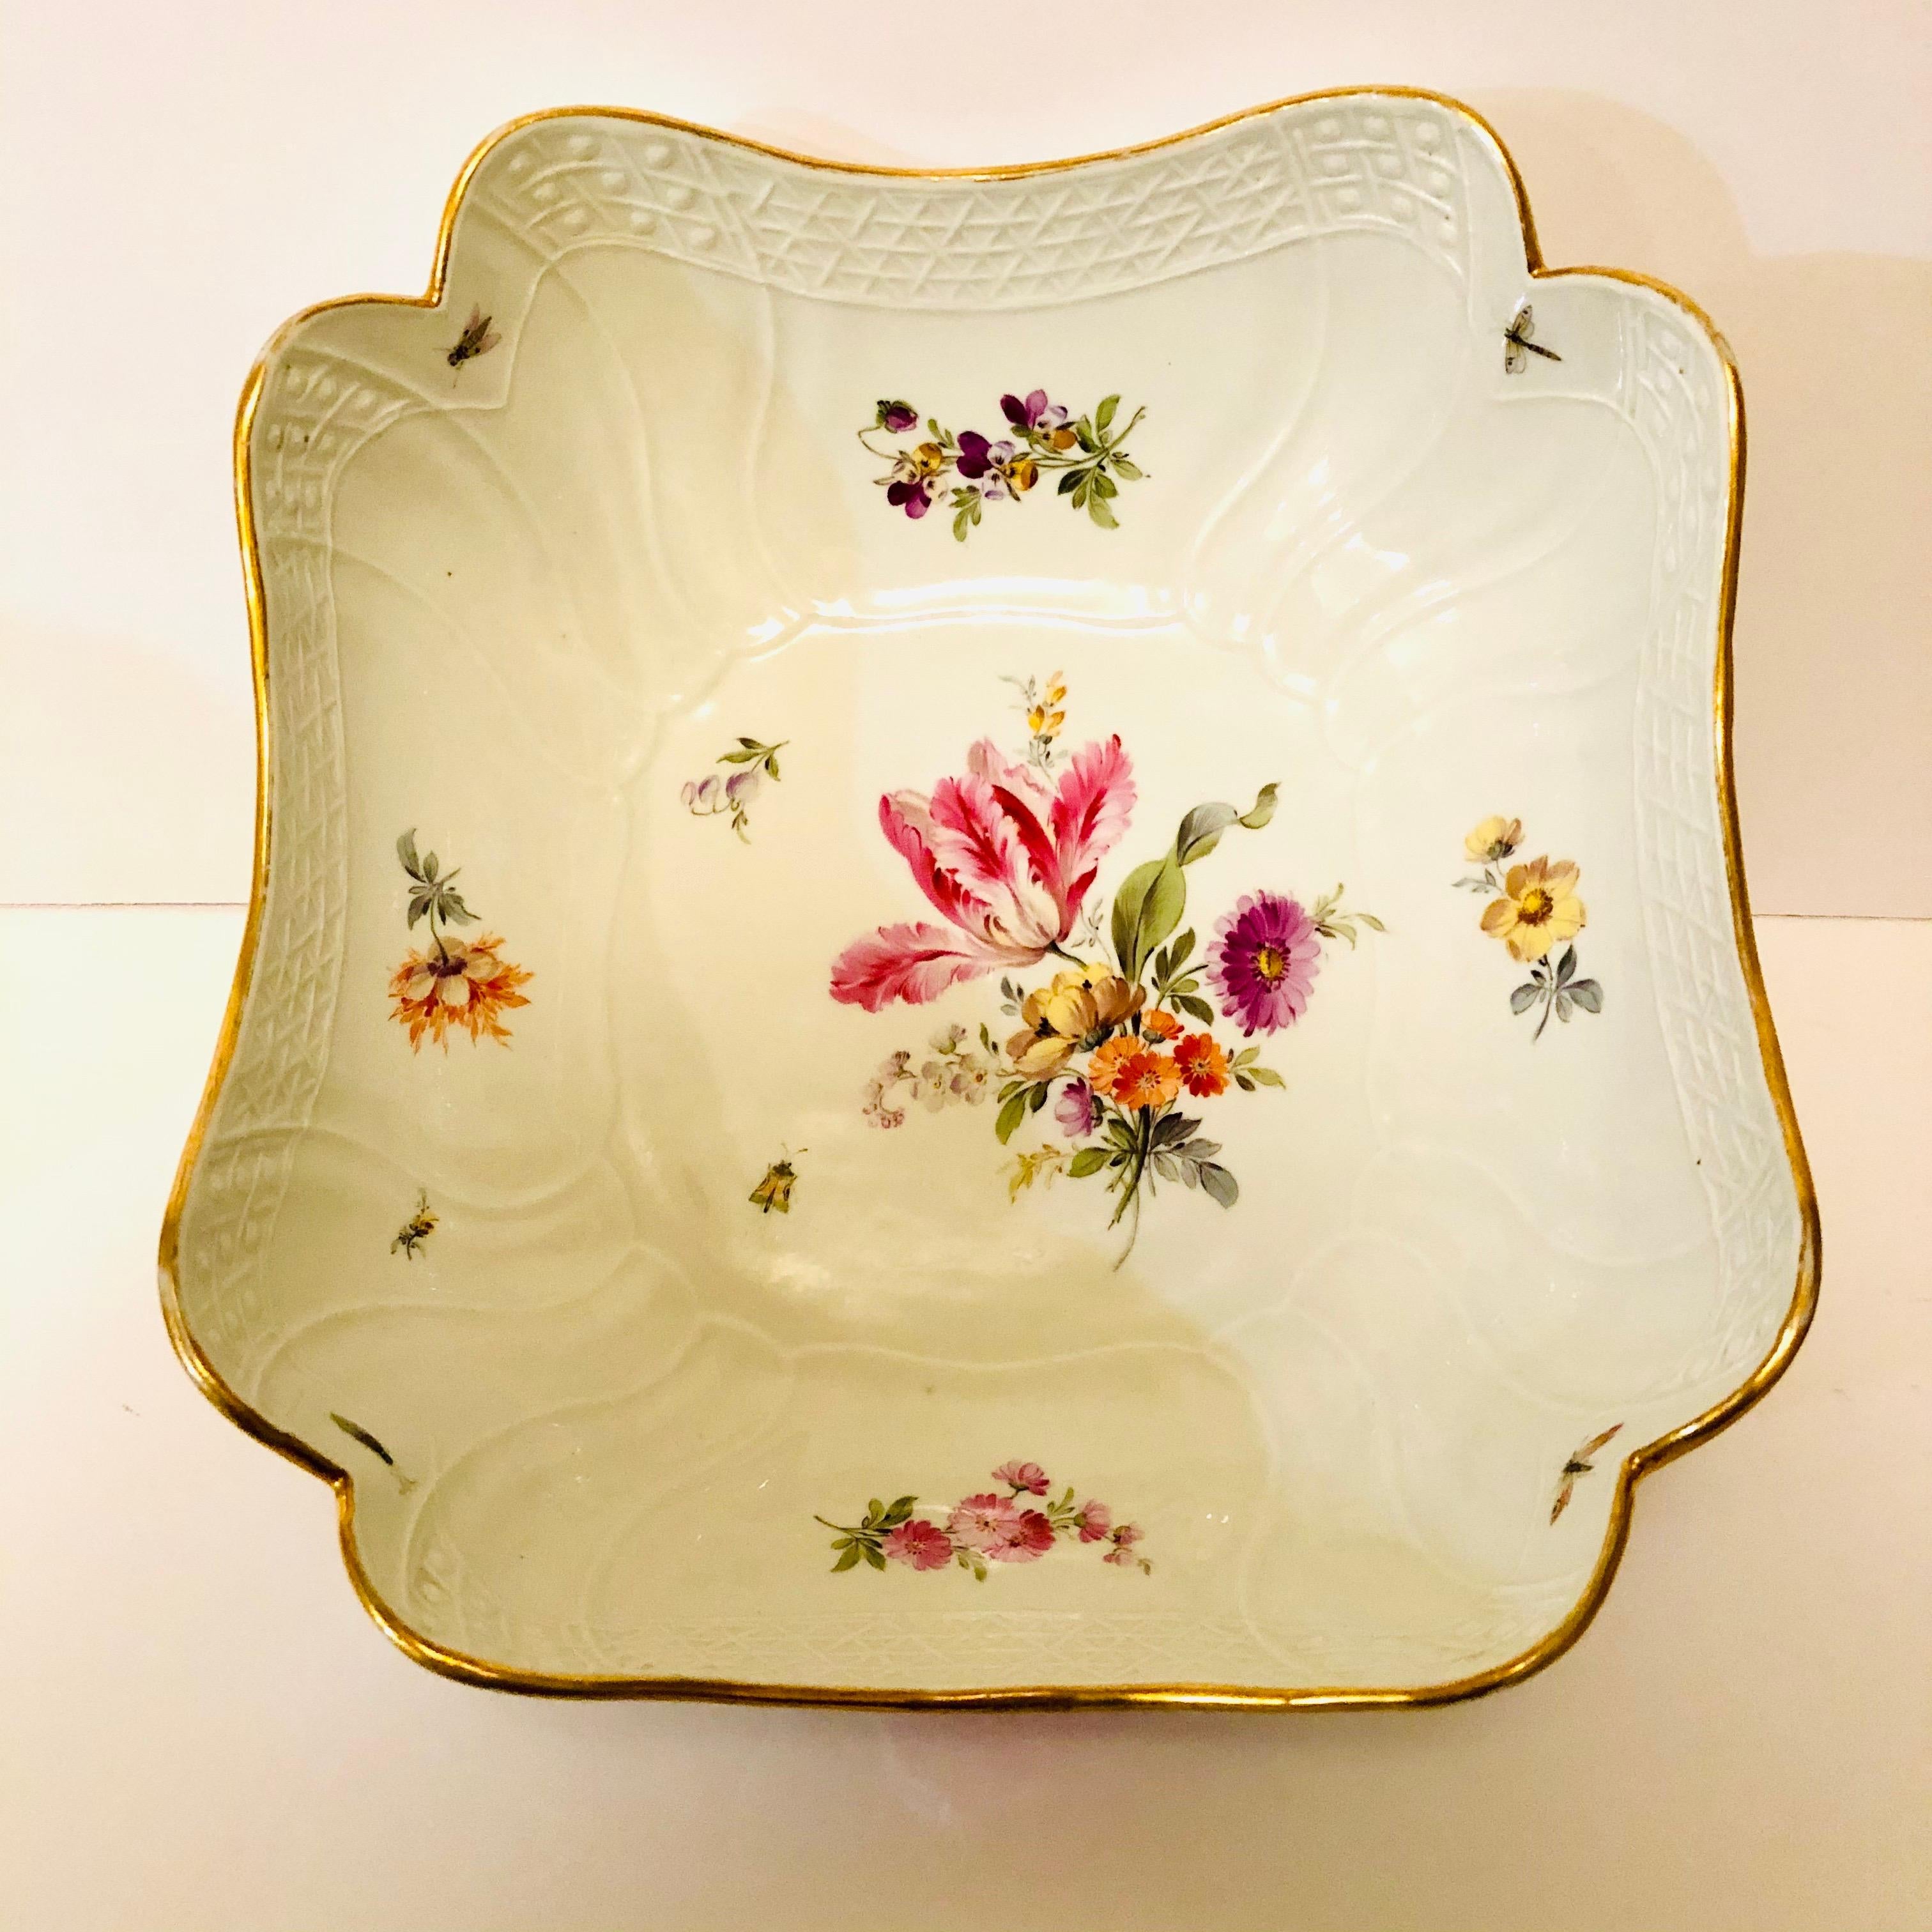 I want to offer you this beautifully painted Meissen four cornered deep serving bowl painted with a large tulip flower bouquet in the center and four different flower bouquets, one on each side of the bowl. It is also decorated with little insects